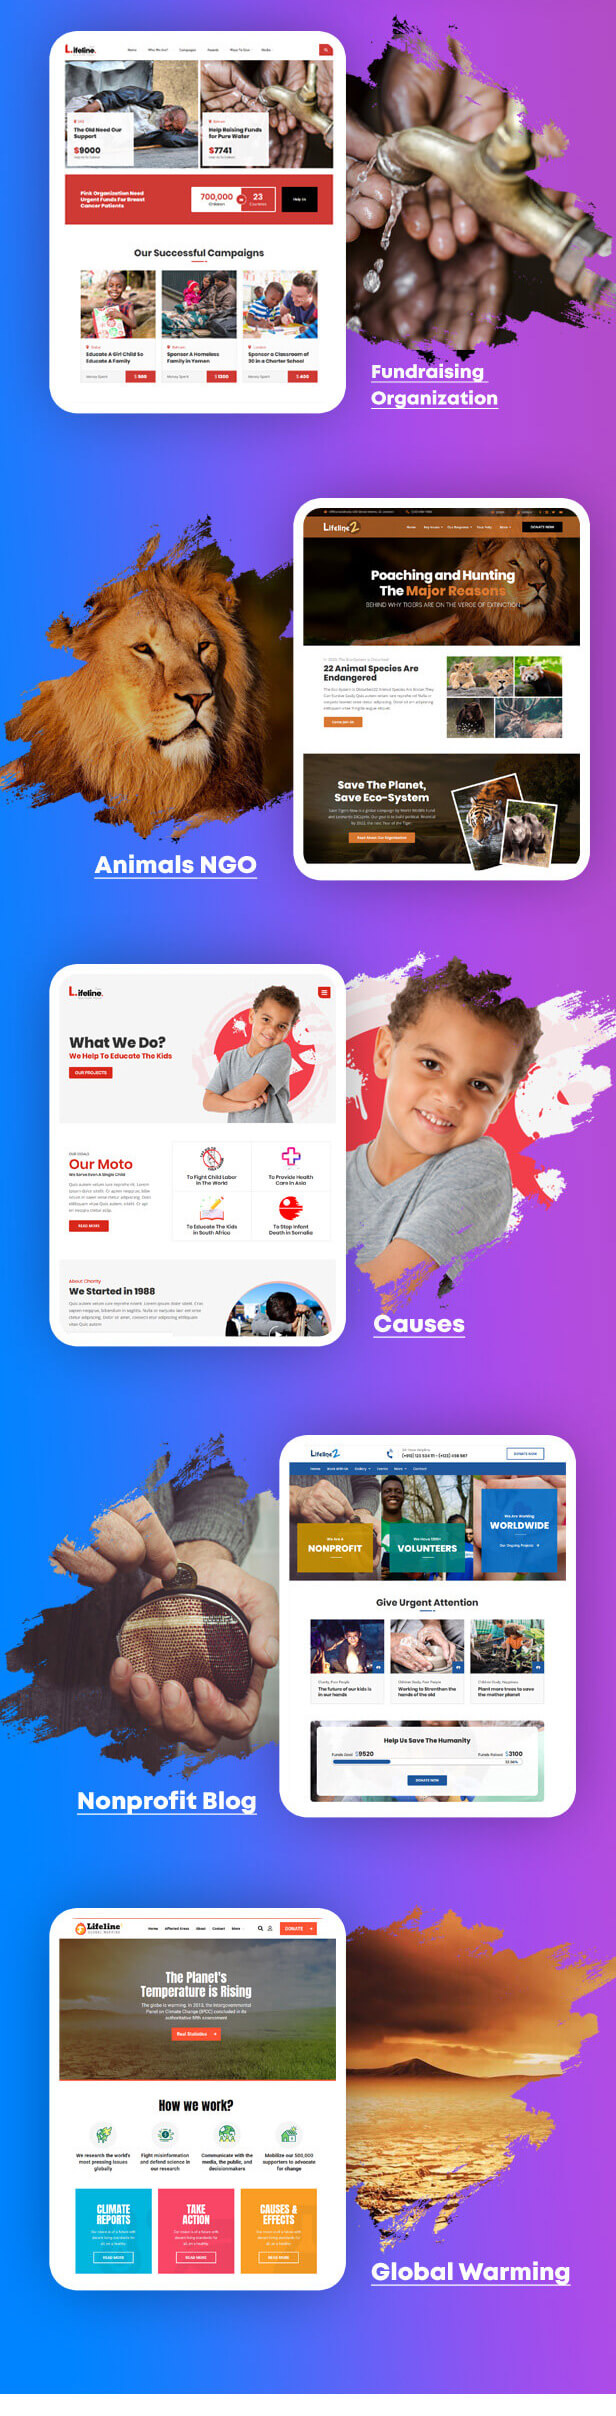 Lifeline 2 - An Ultimate Nonprofit WordPress Theme for Charity, Fundraising and NGO Organizations - 3